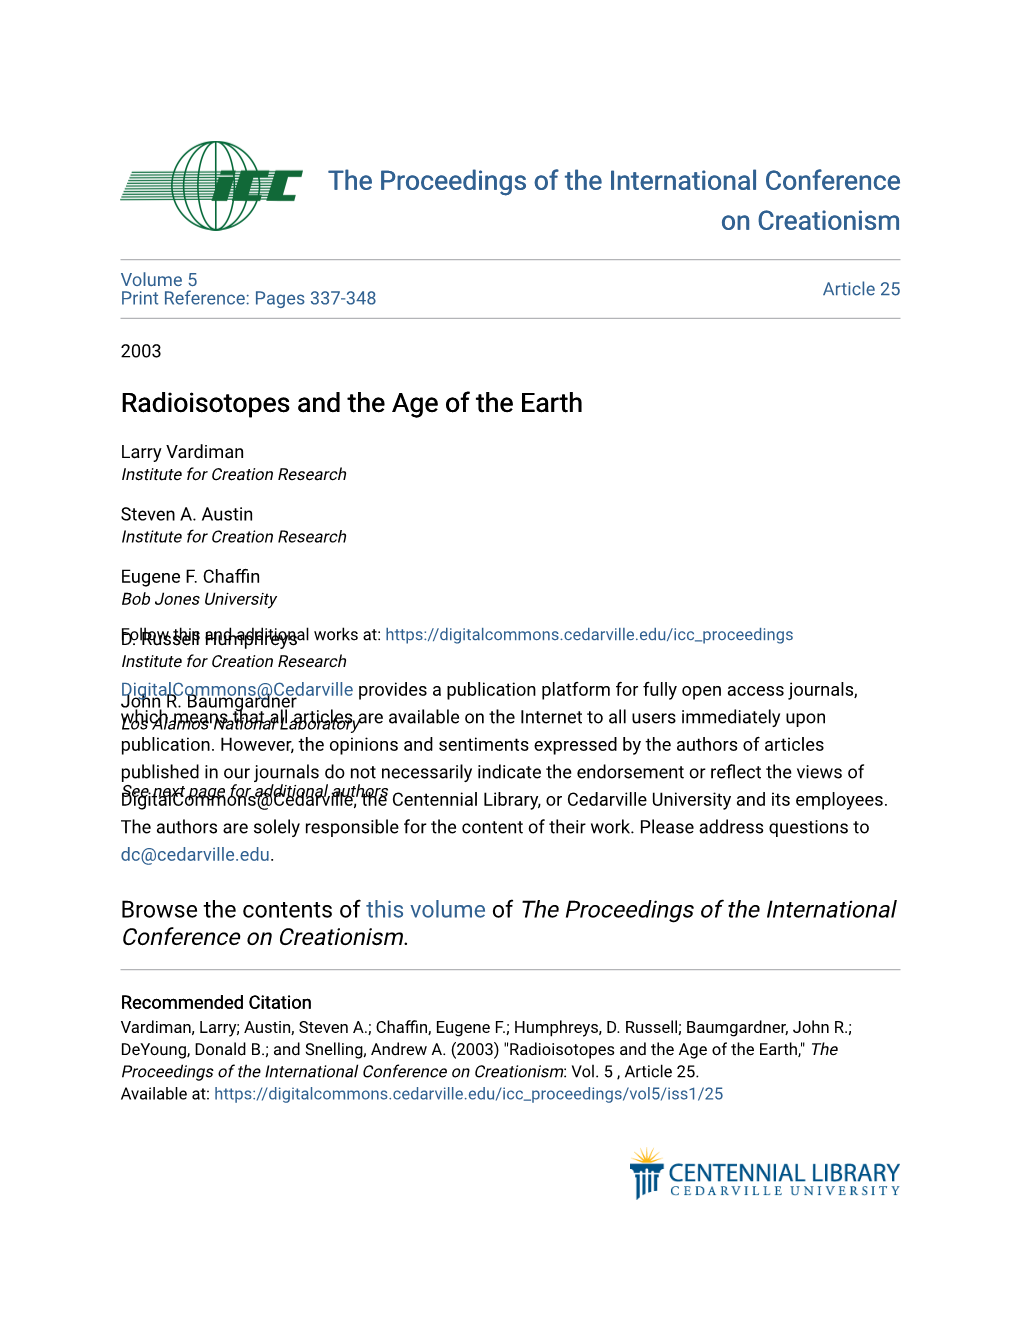 Radioisotopes and the Age of the Earth